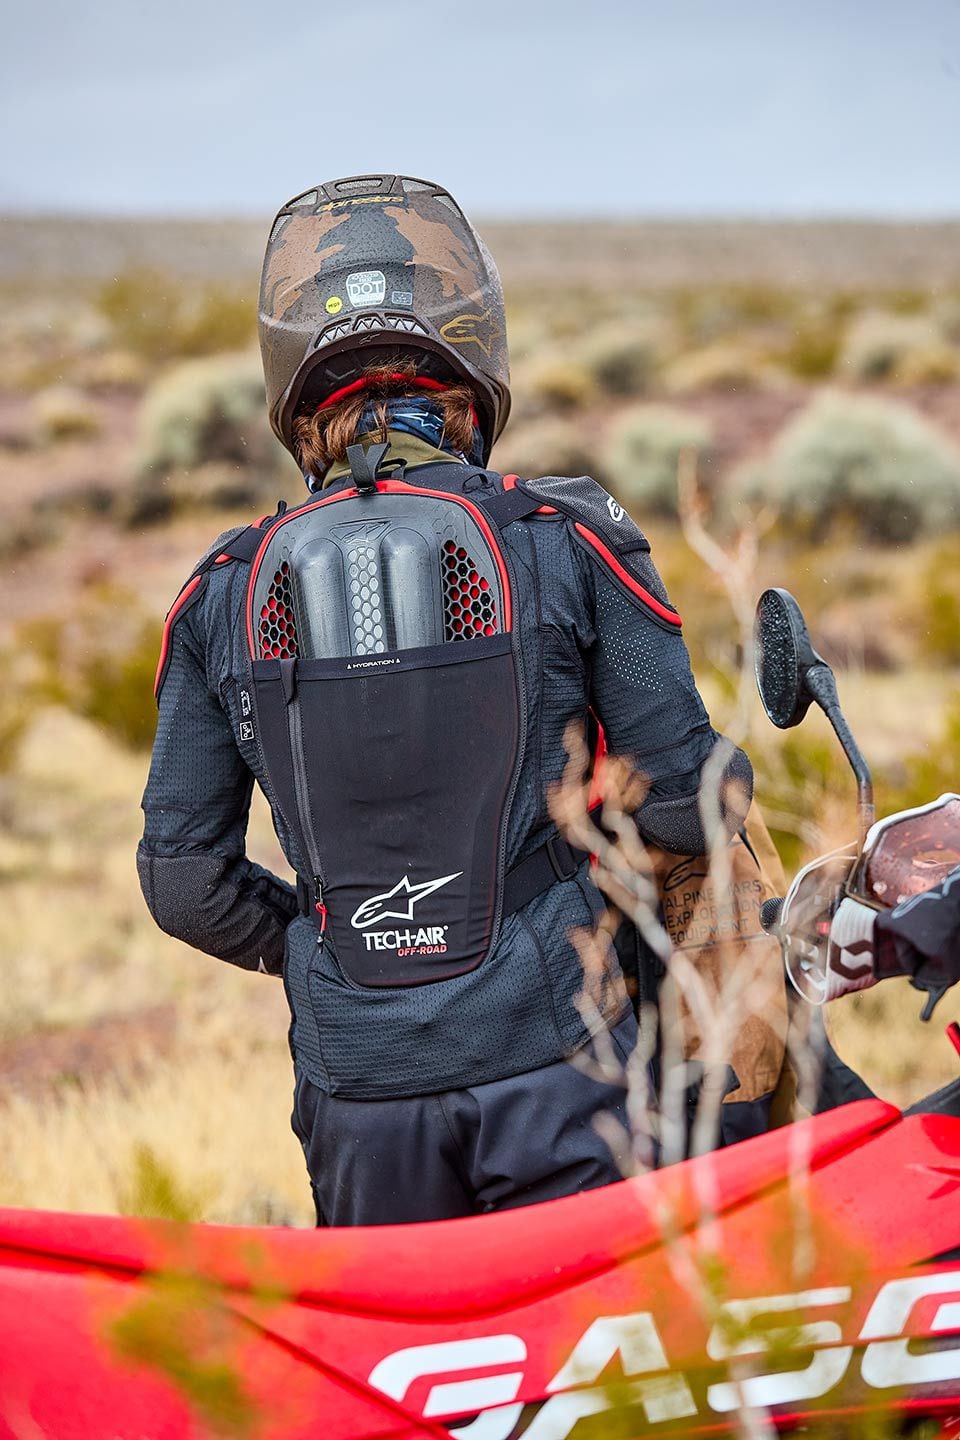 In the back protector is where the two gas canisters and six triaxial sensors can be found. A red light next to each canister indicates if the charge has been deployed or not. The storage pocket on the back of the system can hold a hydration bladder of up to 3 liters.